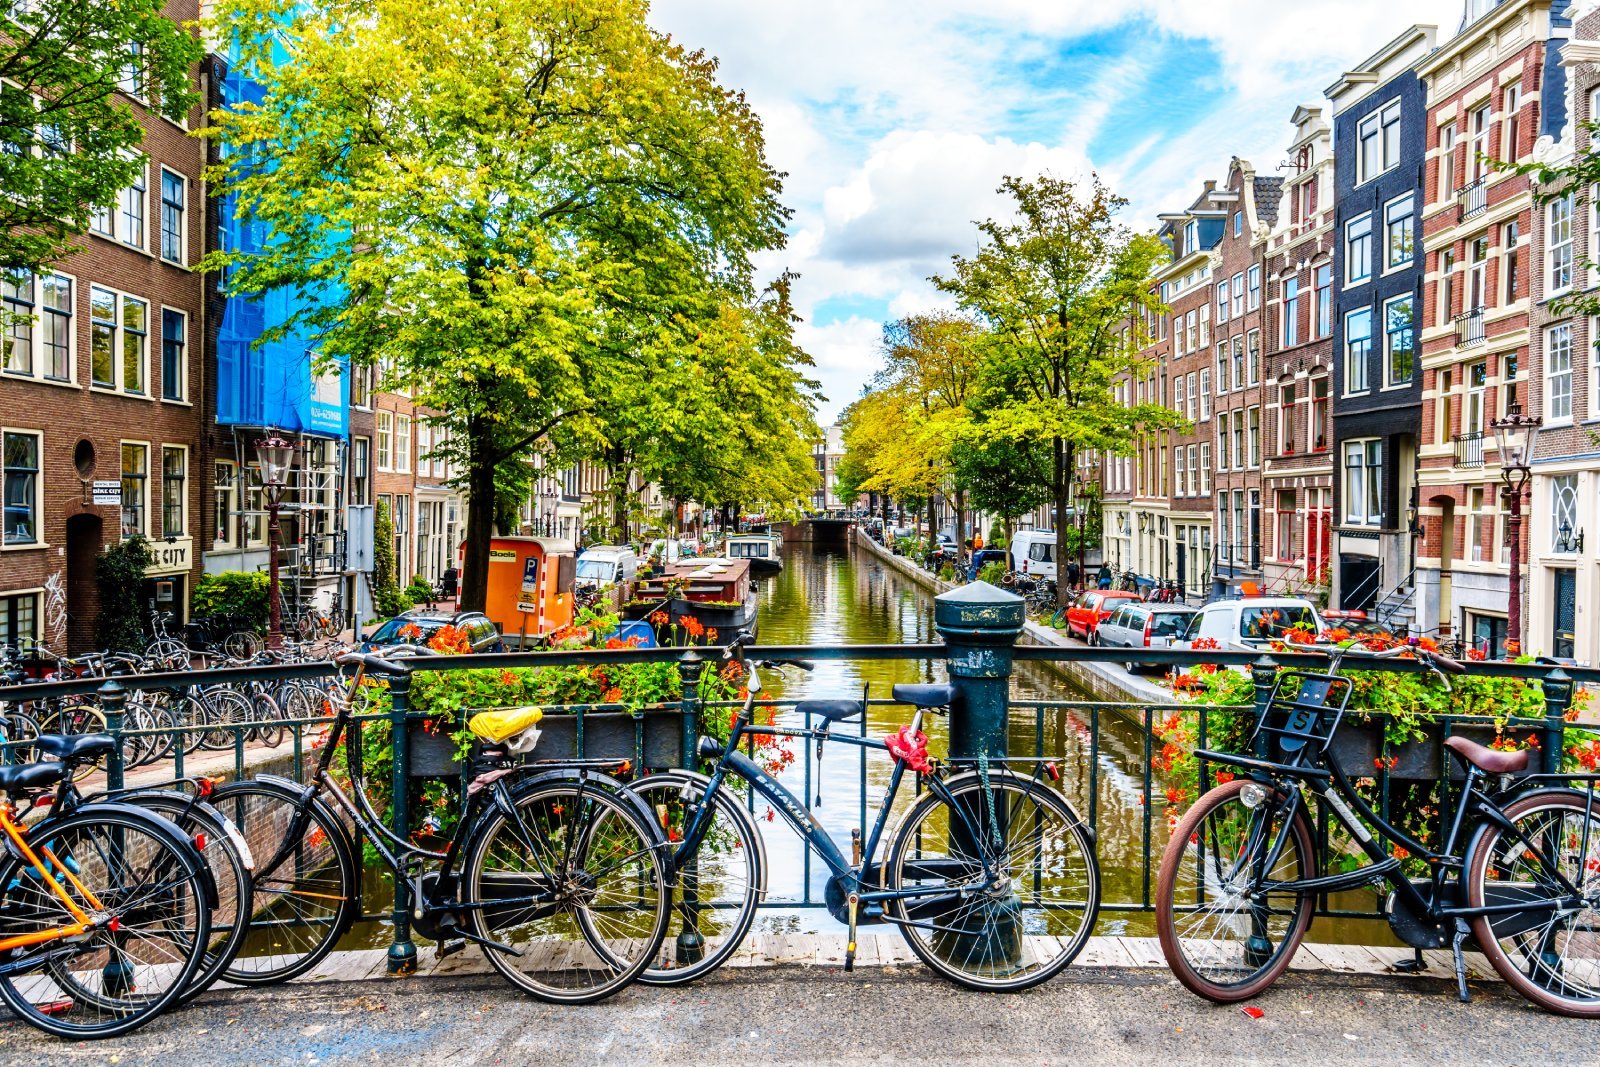 Image Credit: Shutterstock / Harry Beugelink <p><span>Amsterdam stands out for its long-standing tradition of tolerance and acceptance, making it a haven for LGBTQ+ travelers. The city was home to the world’s first gay bar and hosts an array of LGBTQ+ events throughout the year, including the famous Amsterdam Pride, known for its unique canal parade. The vibrant Reguliersdwarsstraat street is the heart of Amsterdam’s LGBTQ+ nightlife, offering various bars, clubs, and cafes. Amsterdam also prides itself on its cultural offerings, with numerous museums and institutions exploring LGBTQ+ themes and history.</span></p> <p><b>Insider’s Tip:</b><span> Visit the Pink Point information kiosk for LGBTQ+-friendly advice, maps, and information on current events and attractions in the city.</span></p> <p><b>When to Travel:</b><span> August, during Amsterdam Pride, is a fantastic time to experience the city’s vibrant LGBTQ+ culture, though Amsterdam’s welcoming atmosphere can be enjoyed year-round.</span></p> <p><b>How to Get There:</b><span> Amsterdam Schiphol Airport is one of Europe’s major hubs, with the city center just a short train ride away.</span></p>